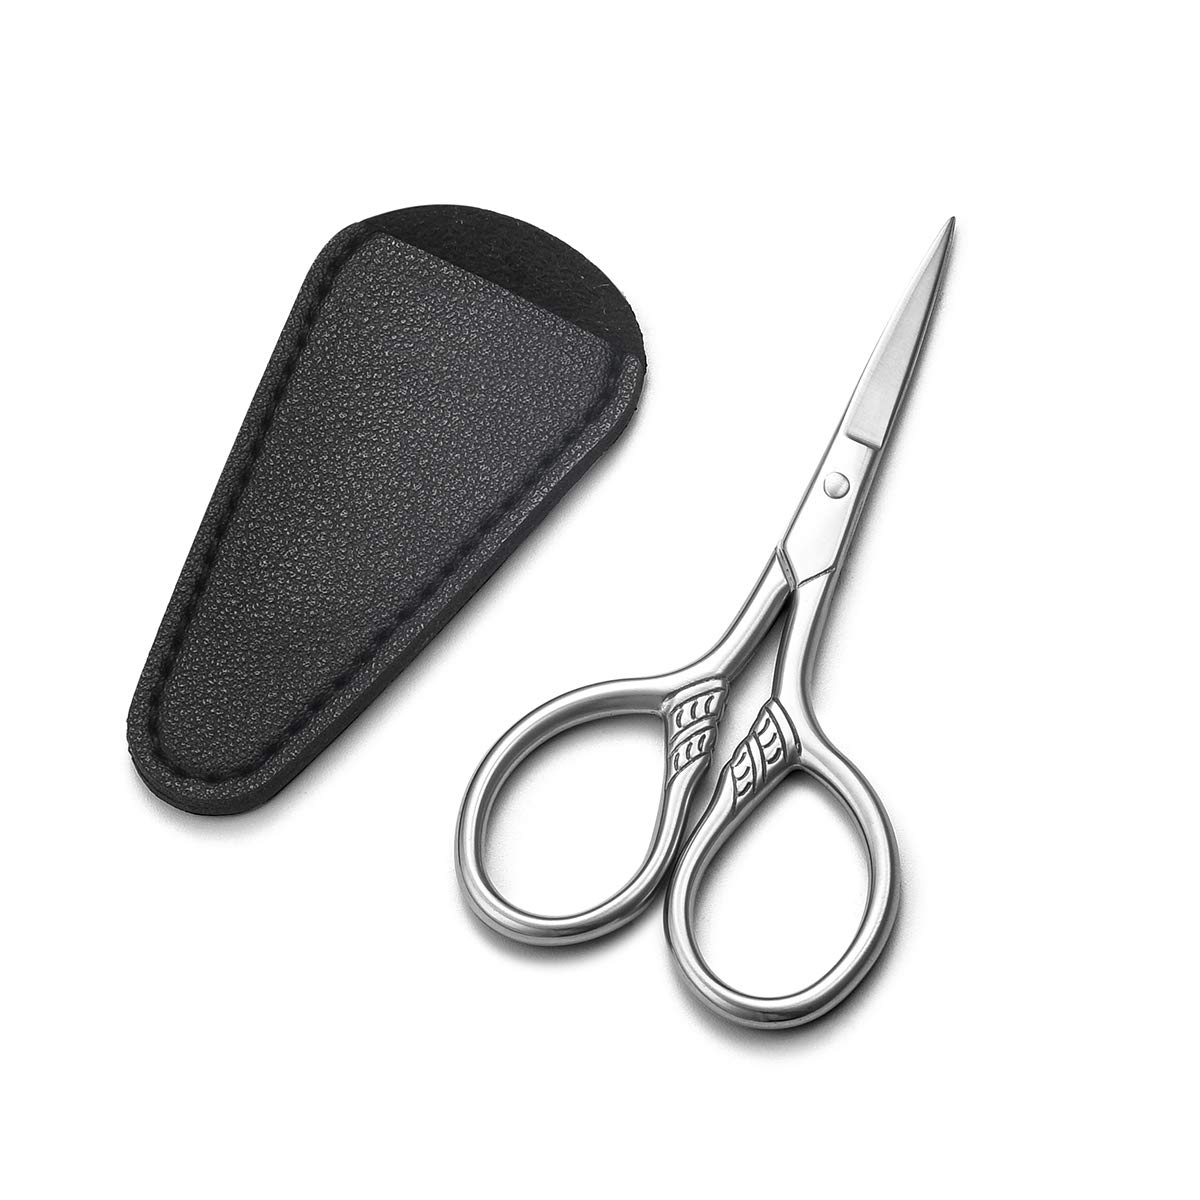 HITOPTY Small Precision Scissors, 3.5inch Stainless Steel Multi-Purpose  Vintage Beauty Grooming Kit for Facial Hair, Eyebrow, Eyelash, Beard,  Moustache with PU Sheath